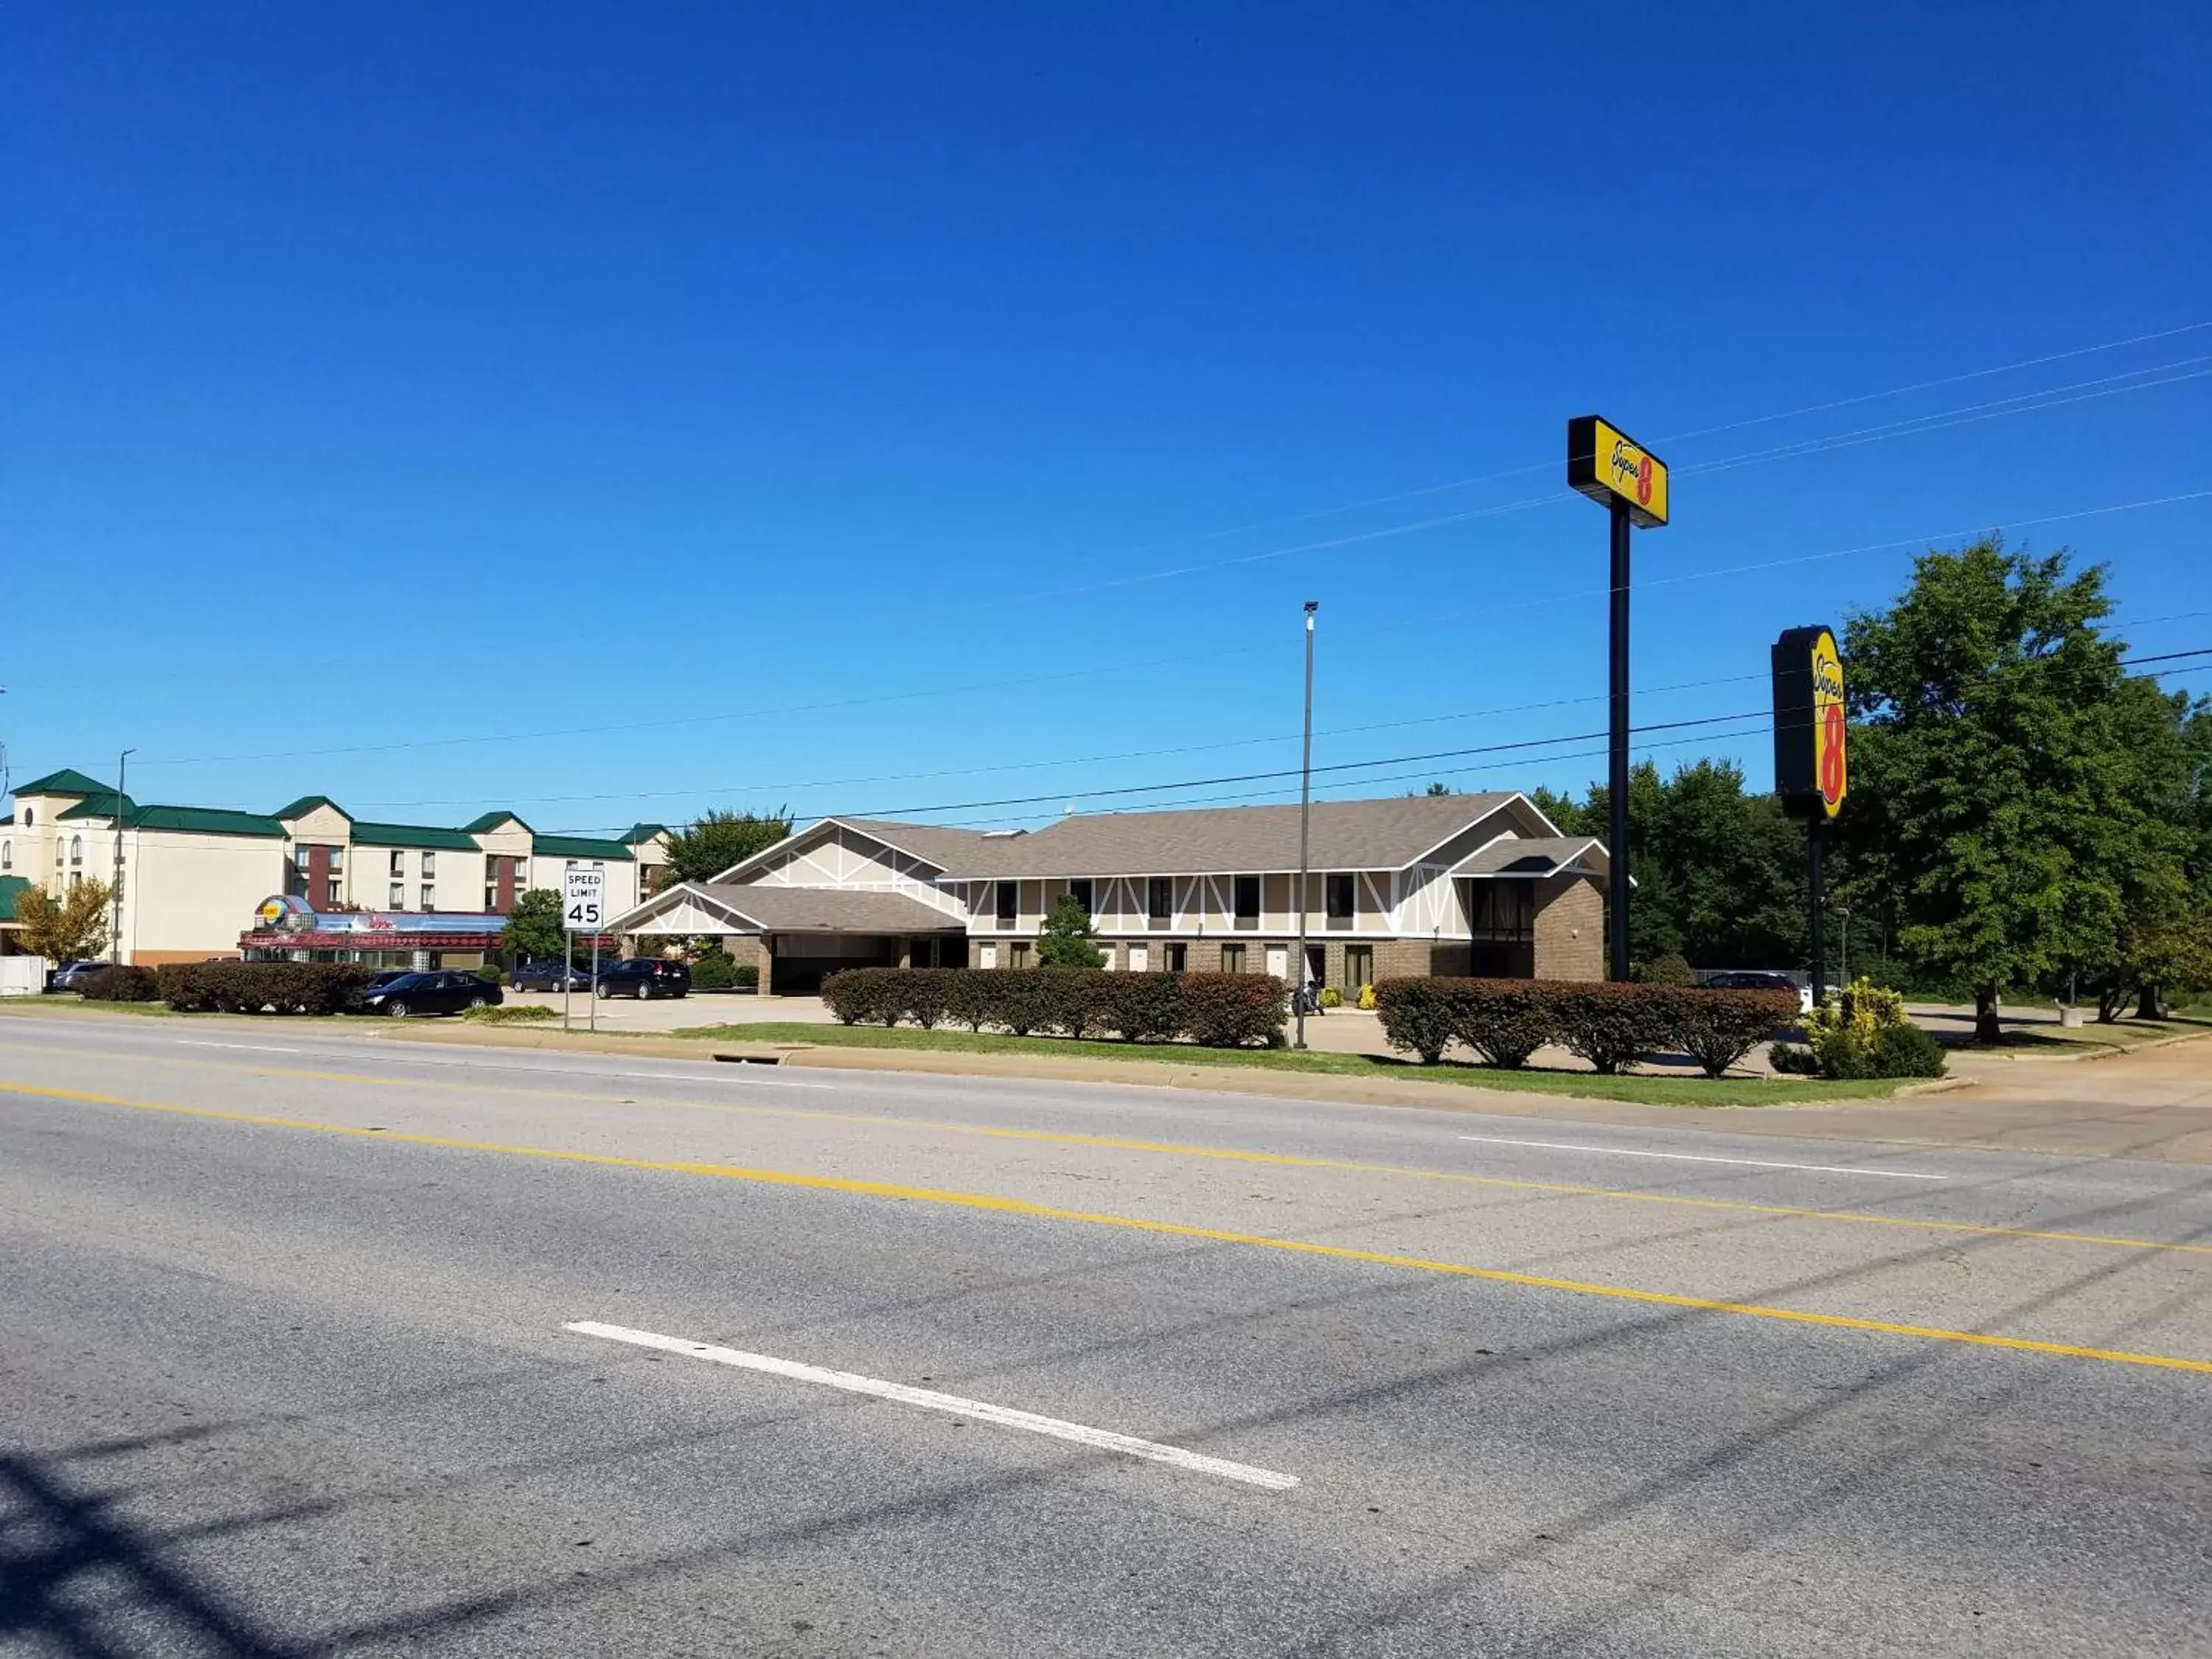 Street view, Property Building in Super 8 by Wyndham Bentonville